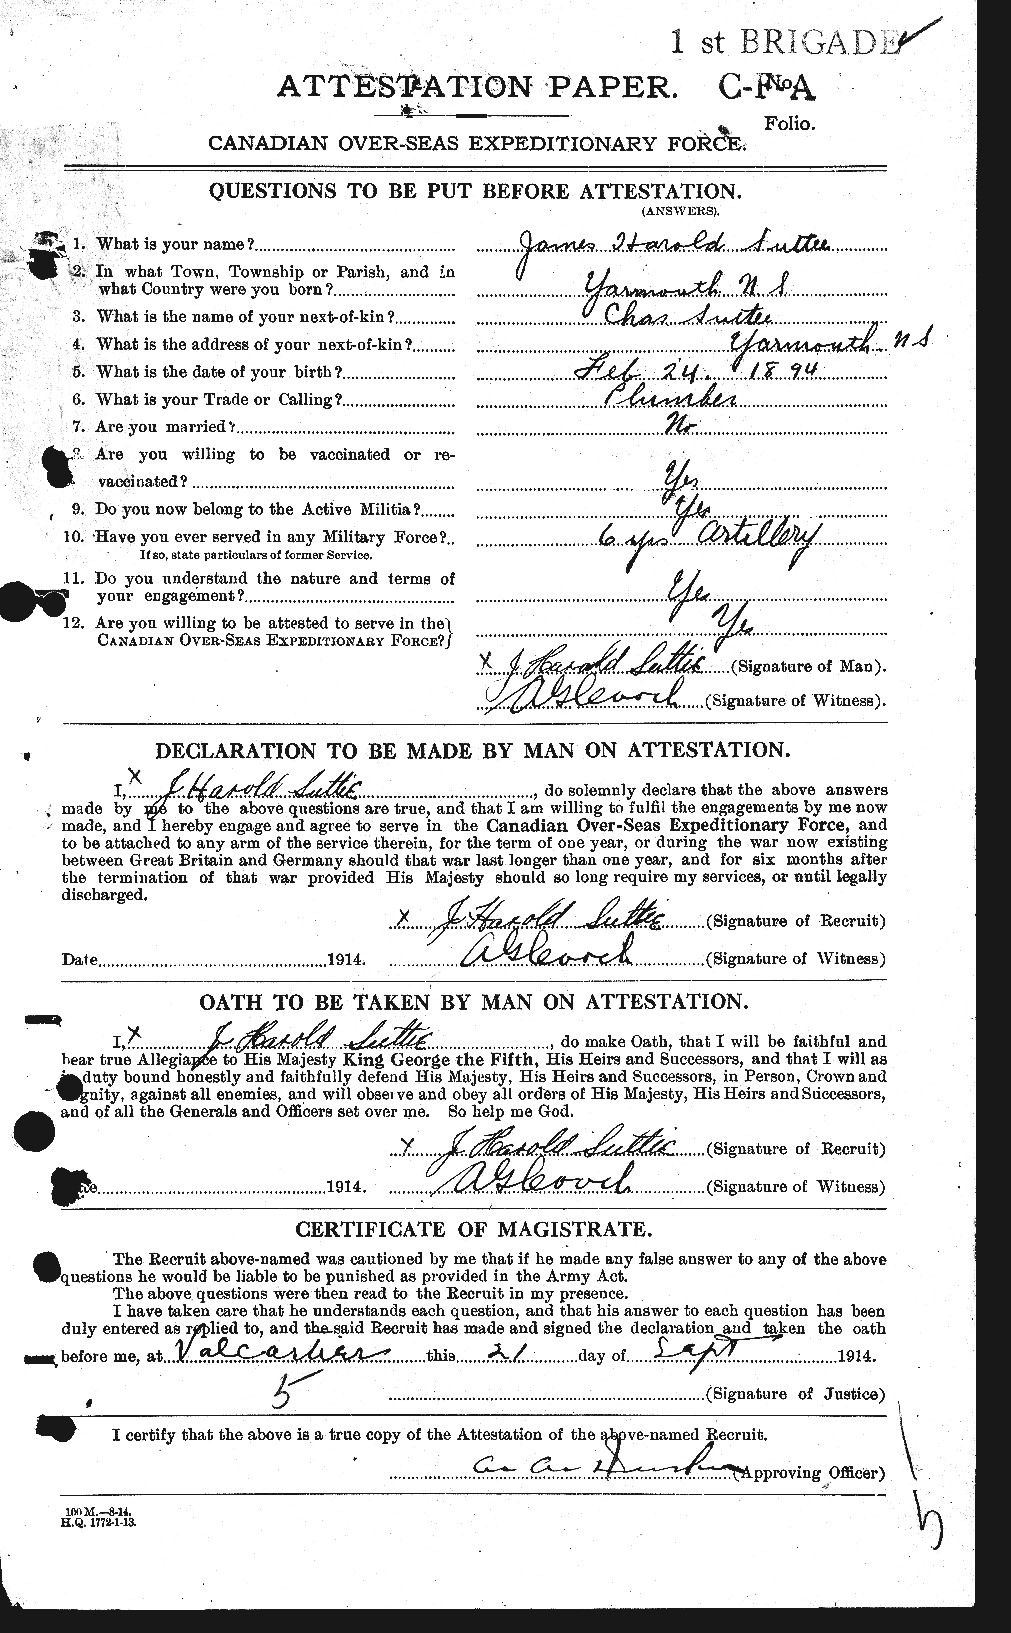 Personnel Records of the First World War - CEF 126305a